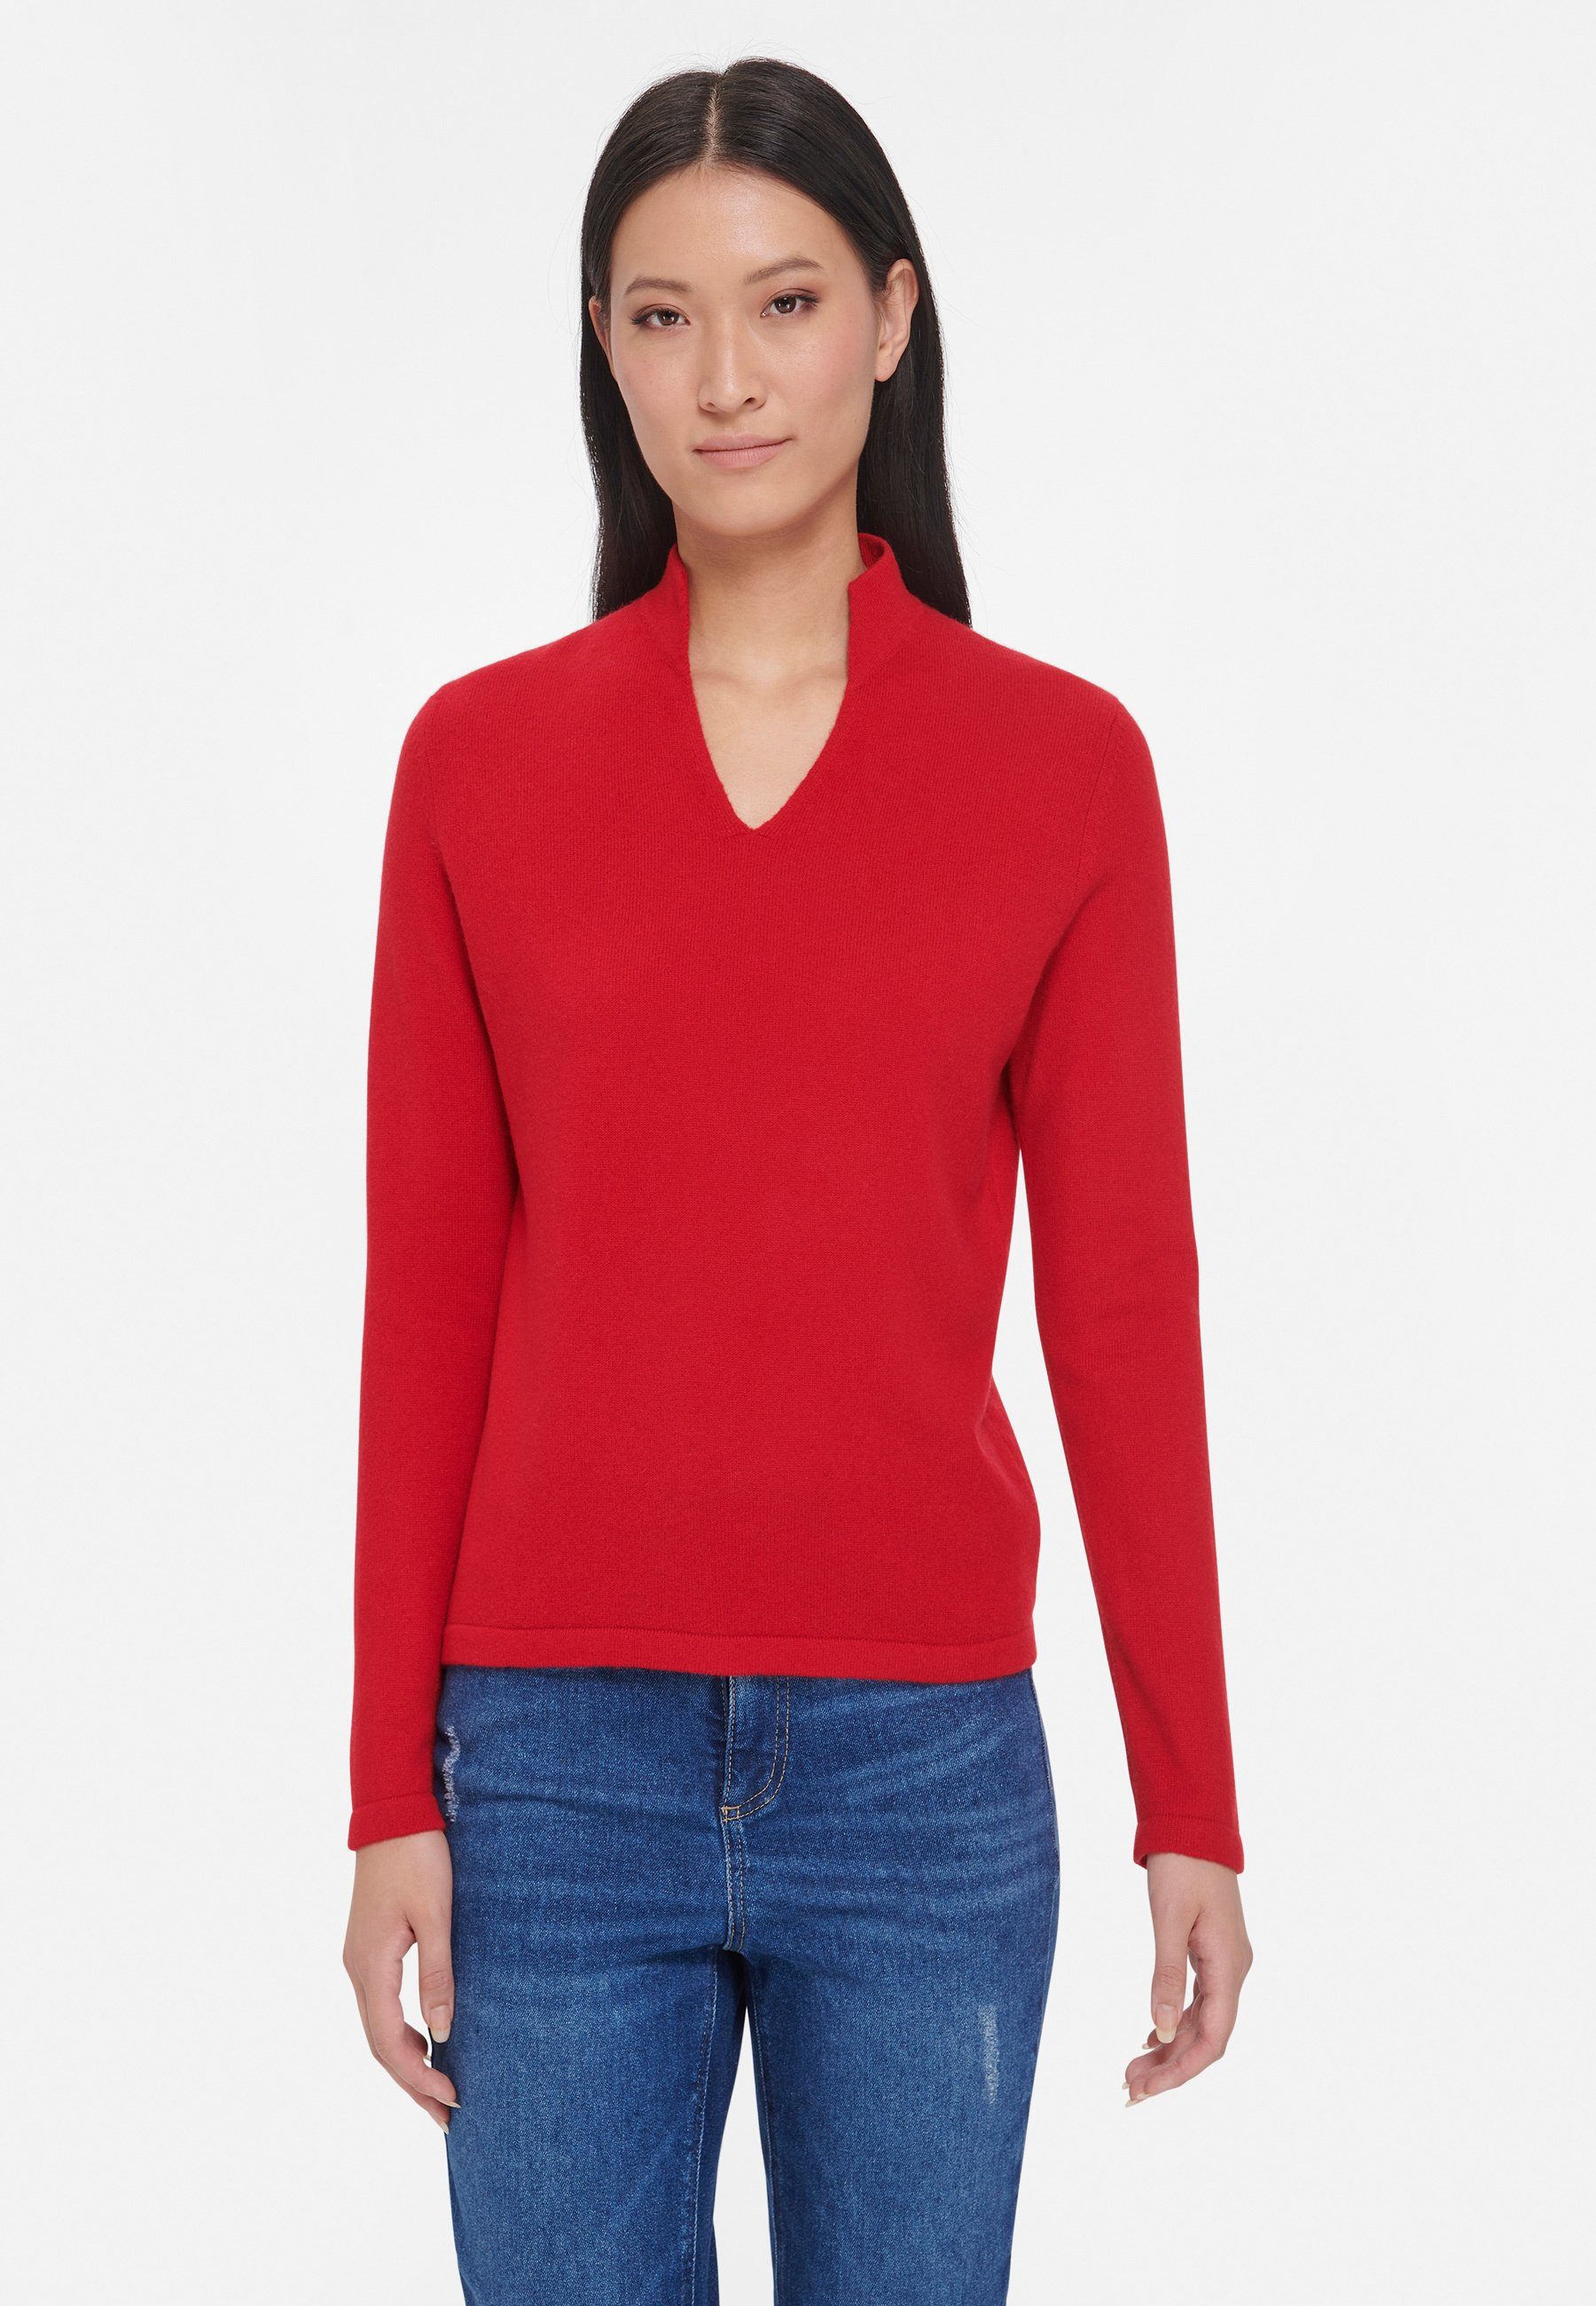 Hahn Peter Cashmere rot Strickpullover